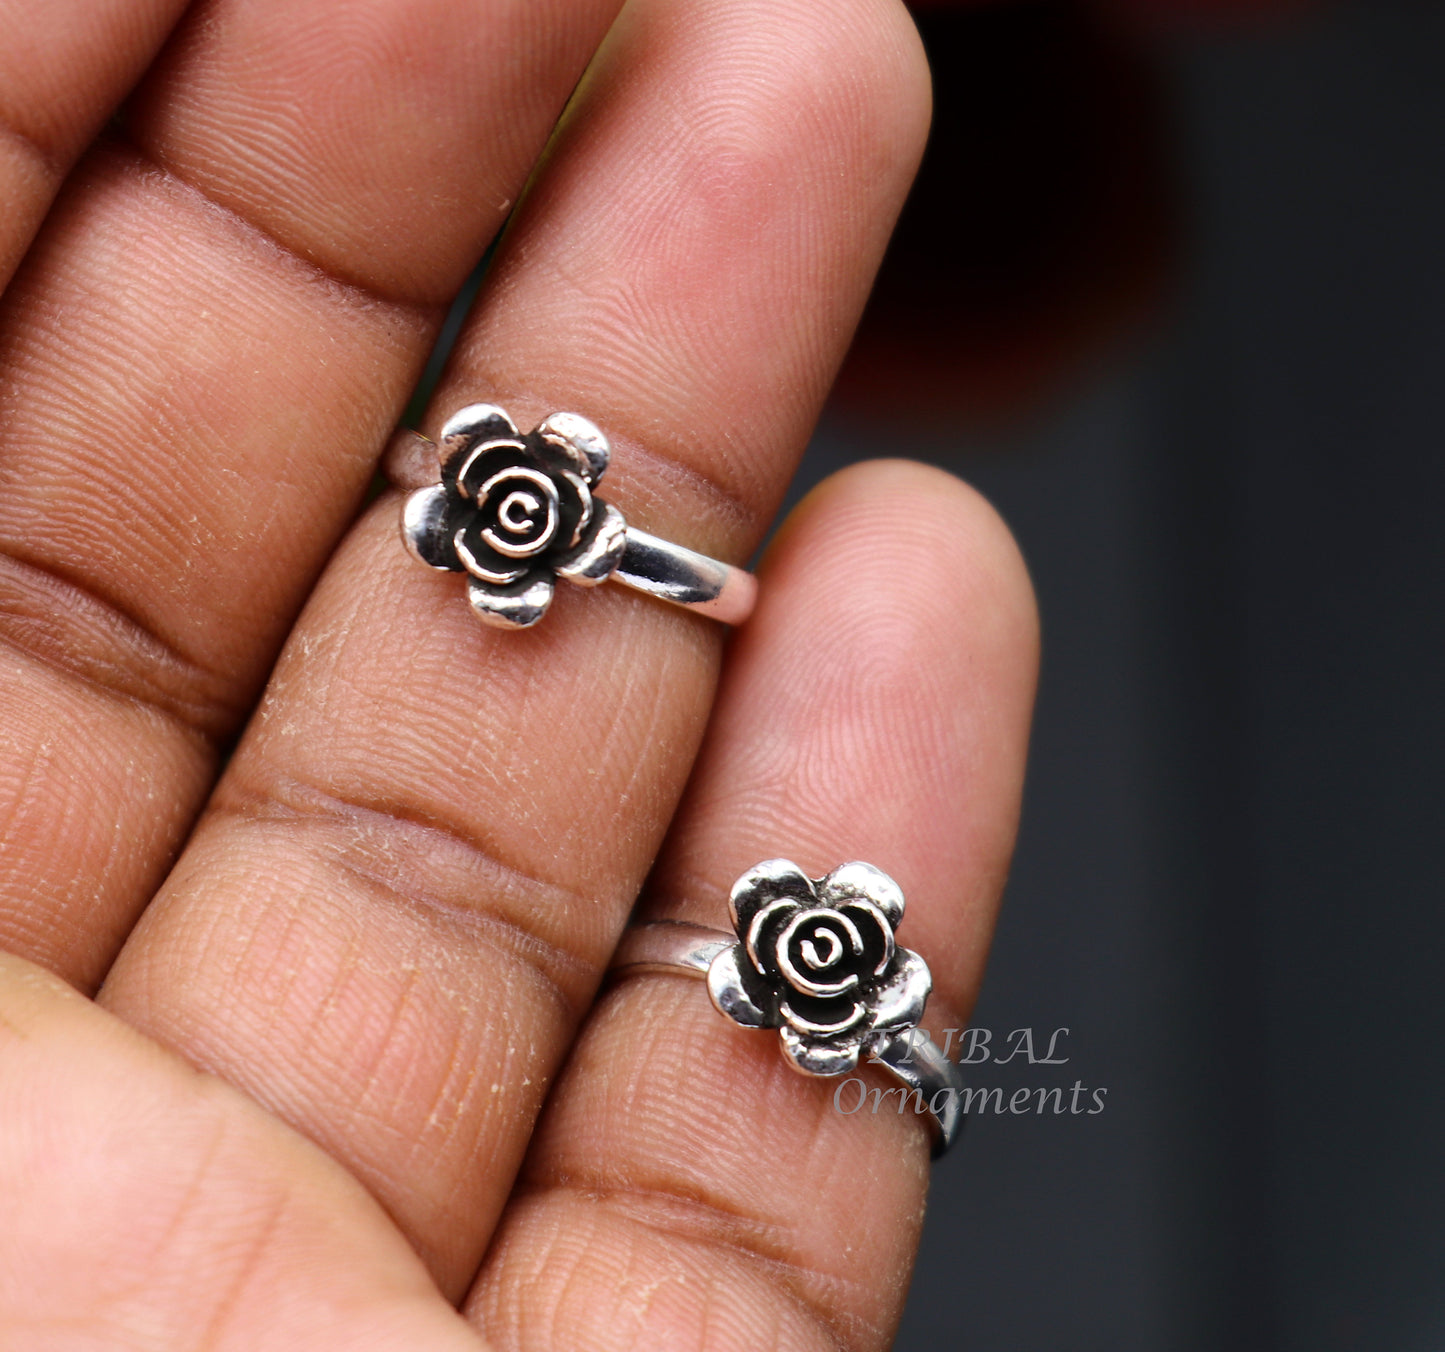 925 sterling silver handmade amazing rose flower design toe ring band tribal belly dance vintage style ethnic brides jewelry ytr35 - TRIBAL ORNAMENTS